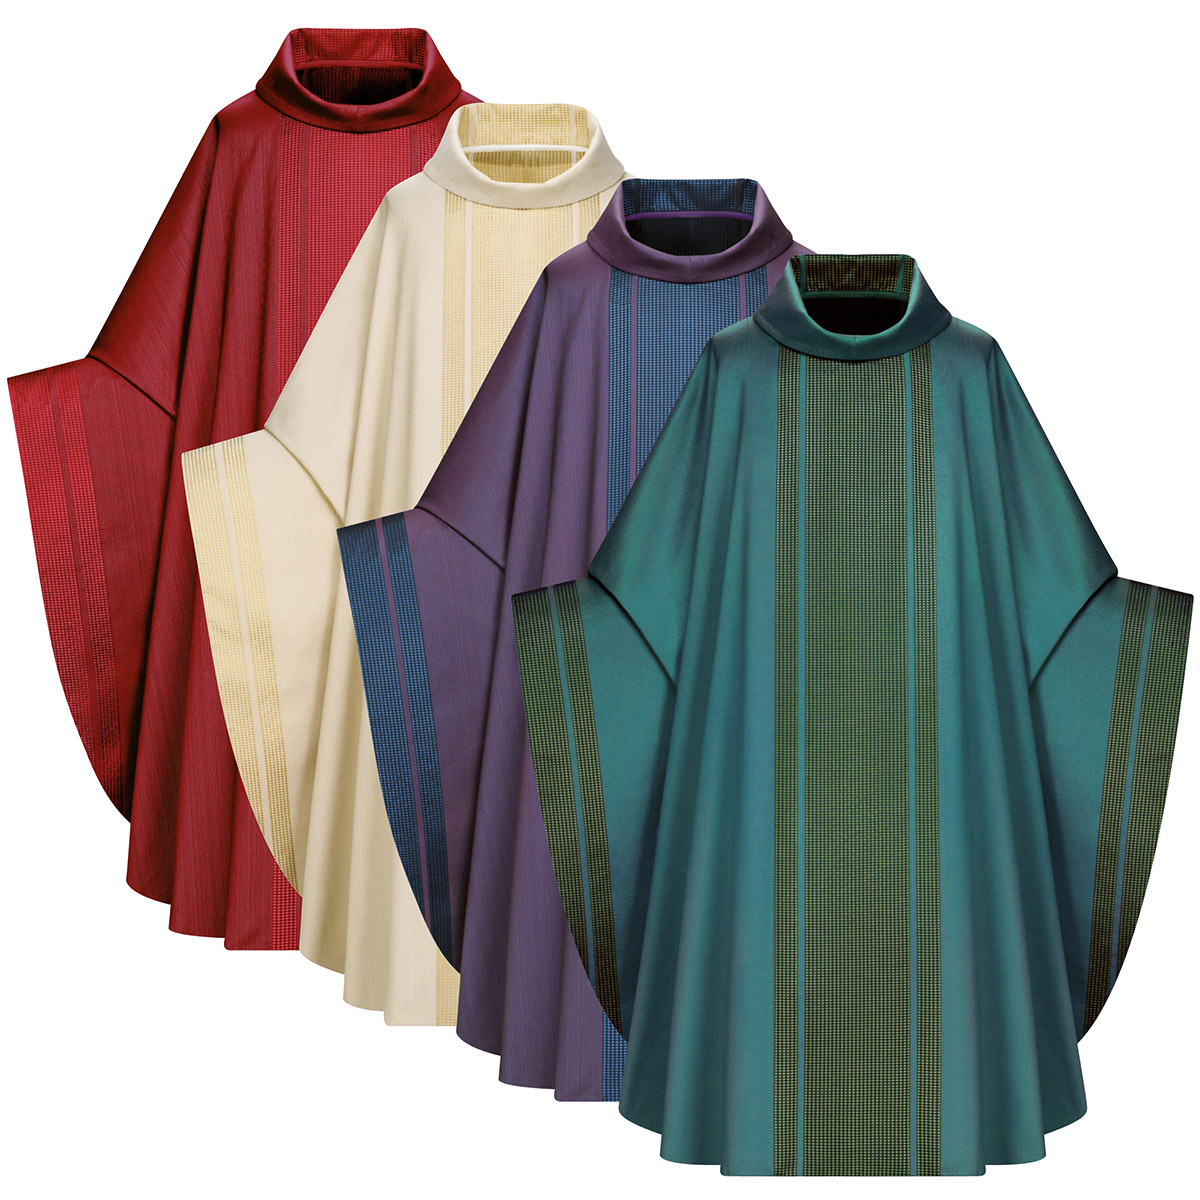 Slabbinck Gothic Chasuble with Roll Collar in Agate Fabric – Set of 4 Colors